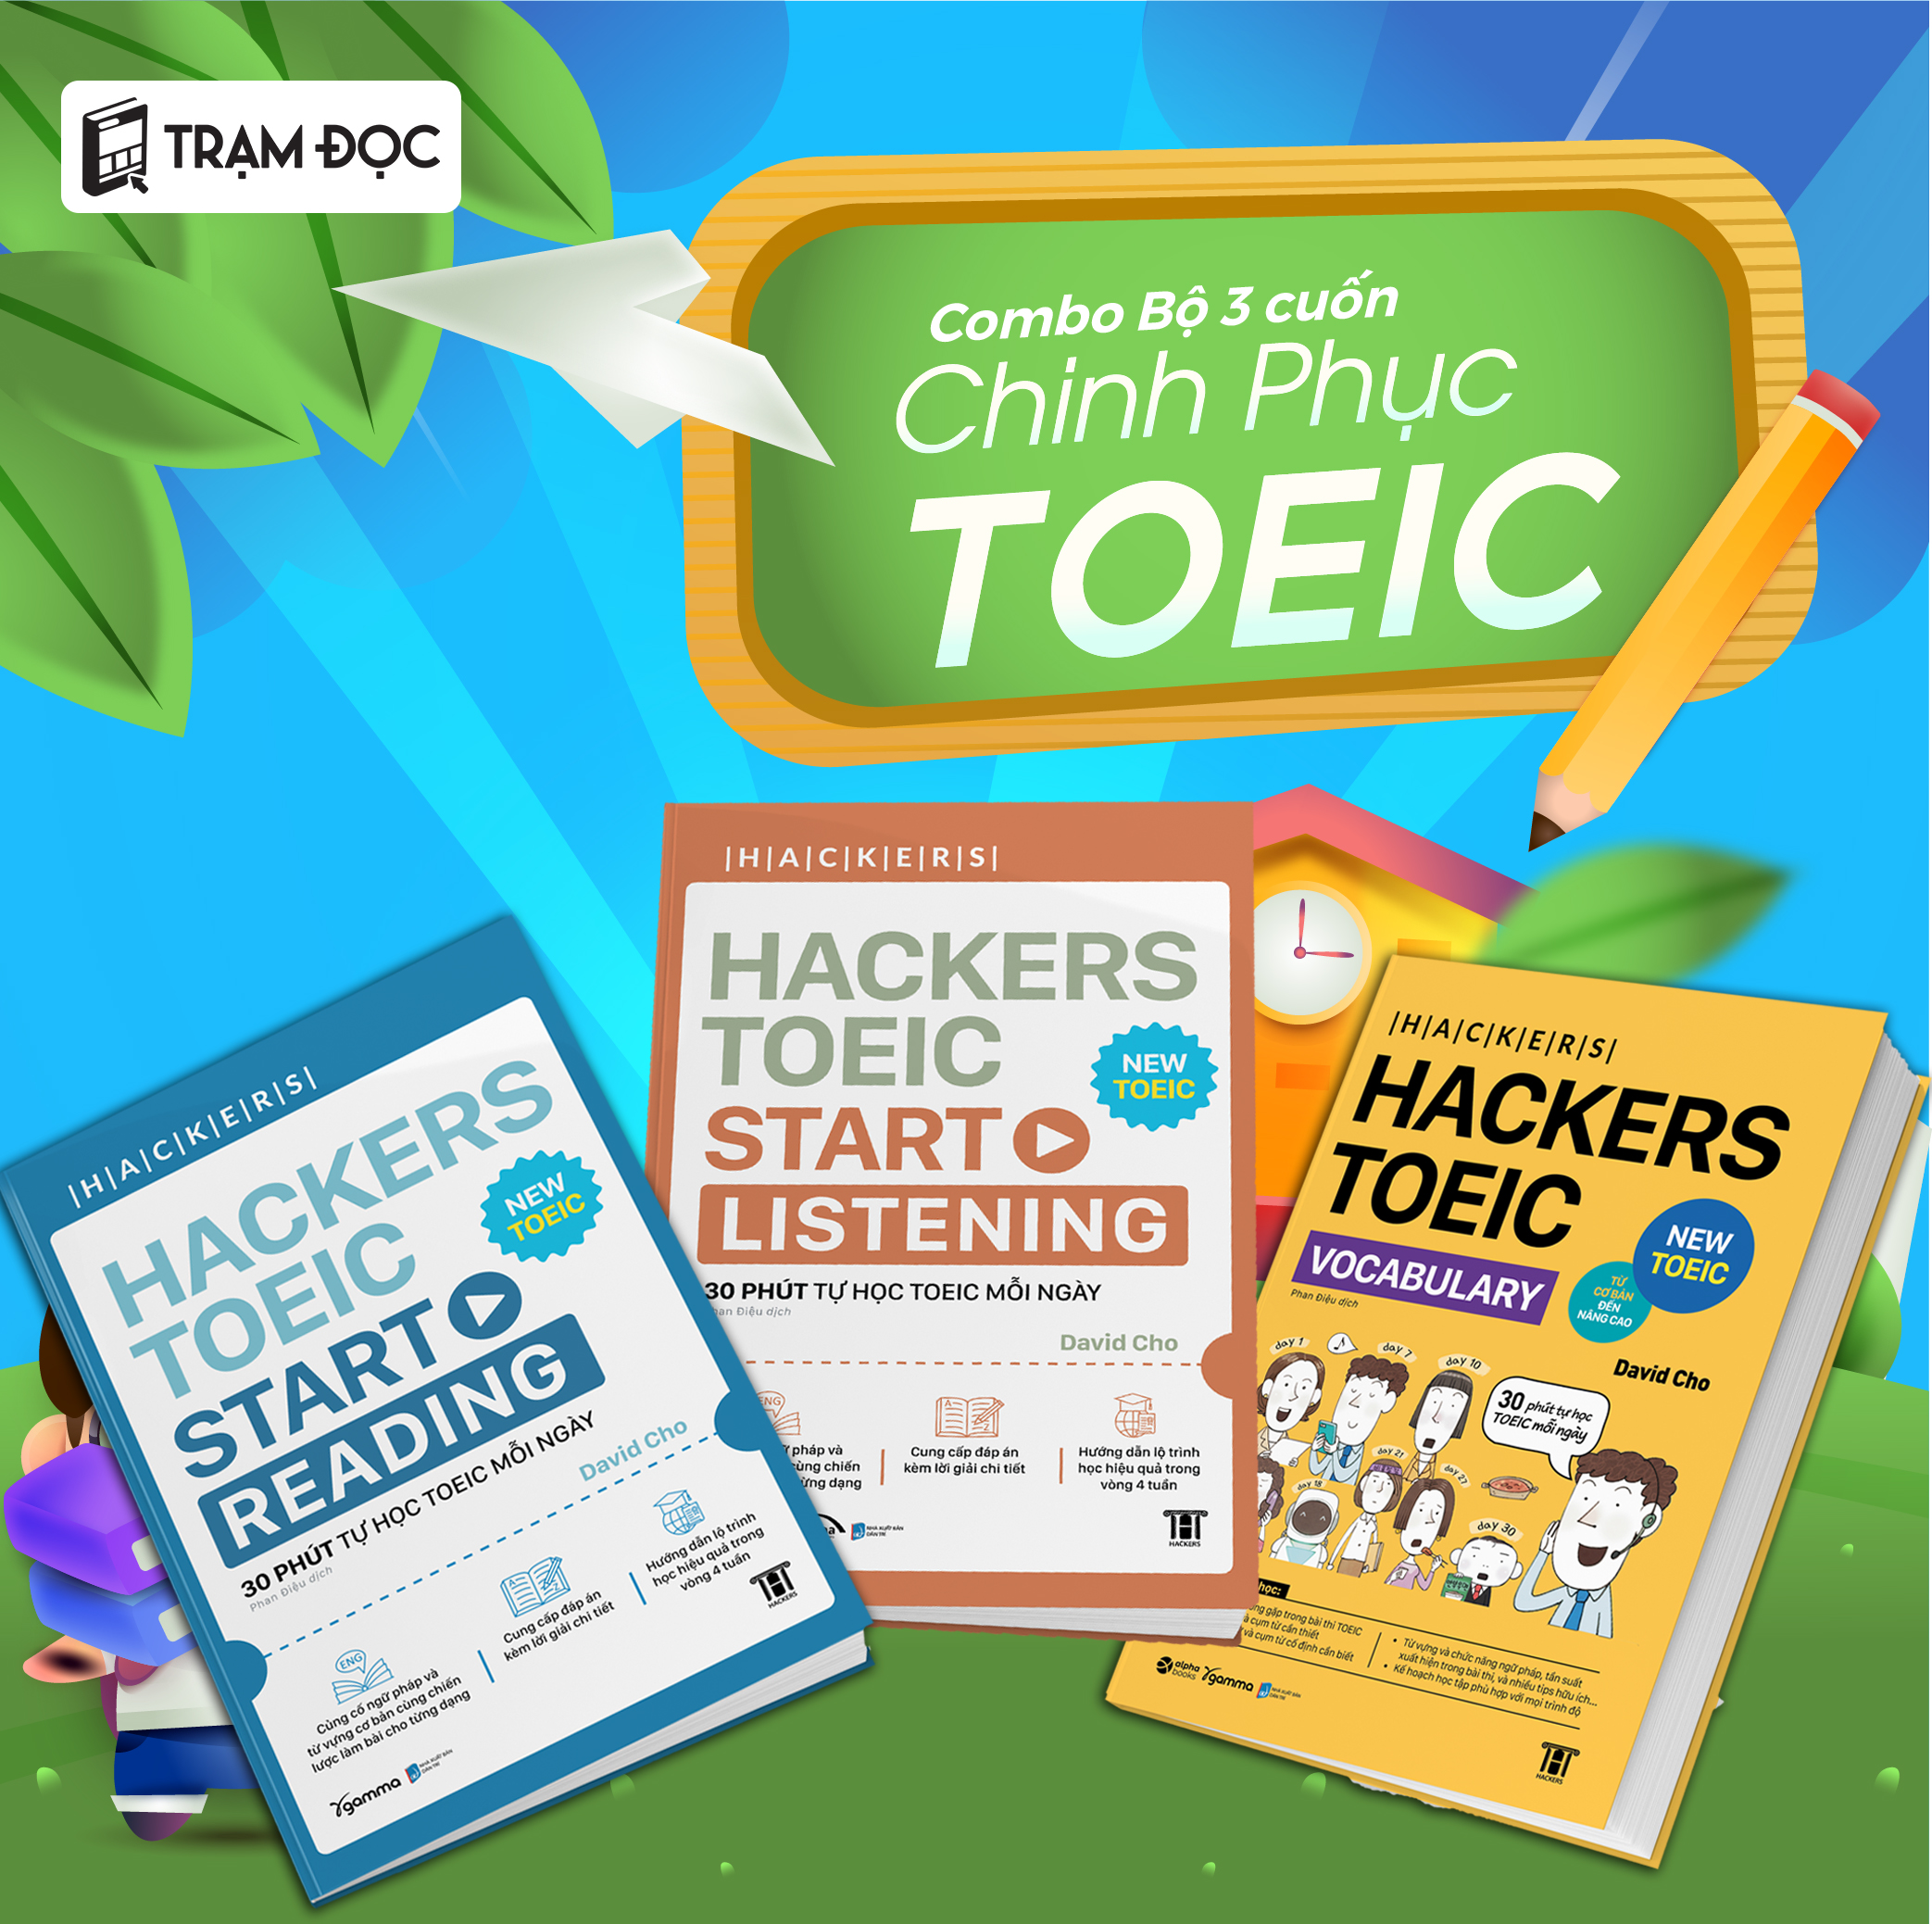 Hackers TOEIC Reading + Listening + Vocabulary  | Trạm Đọc Official